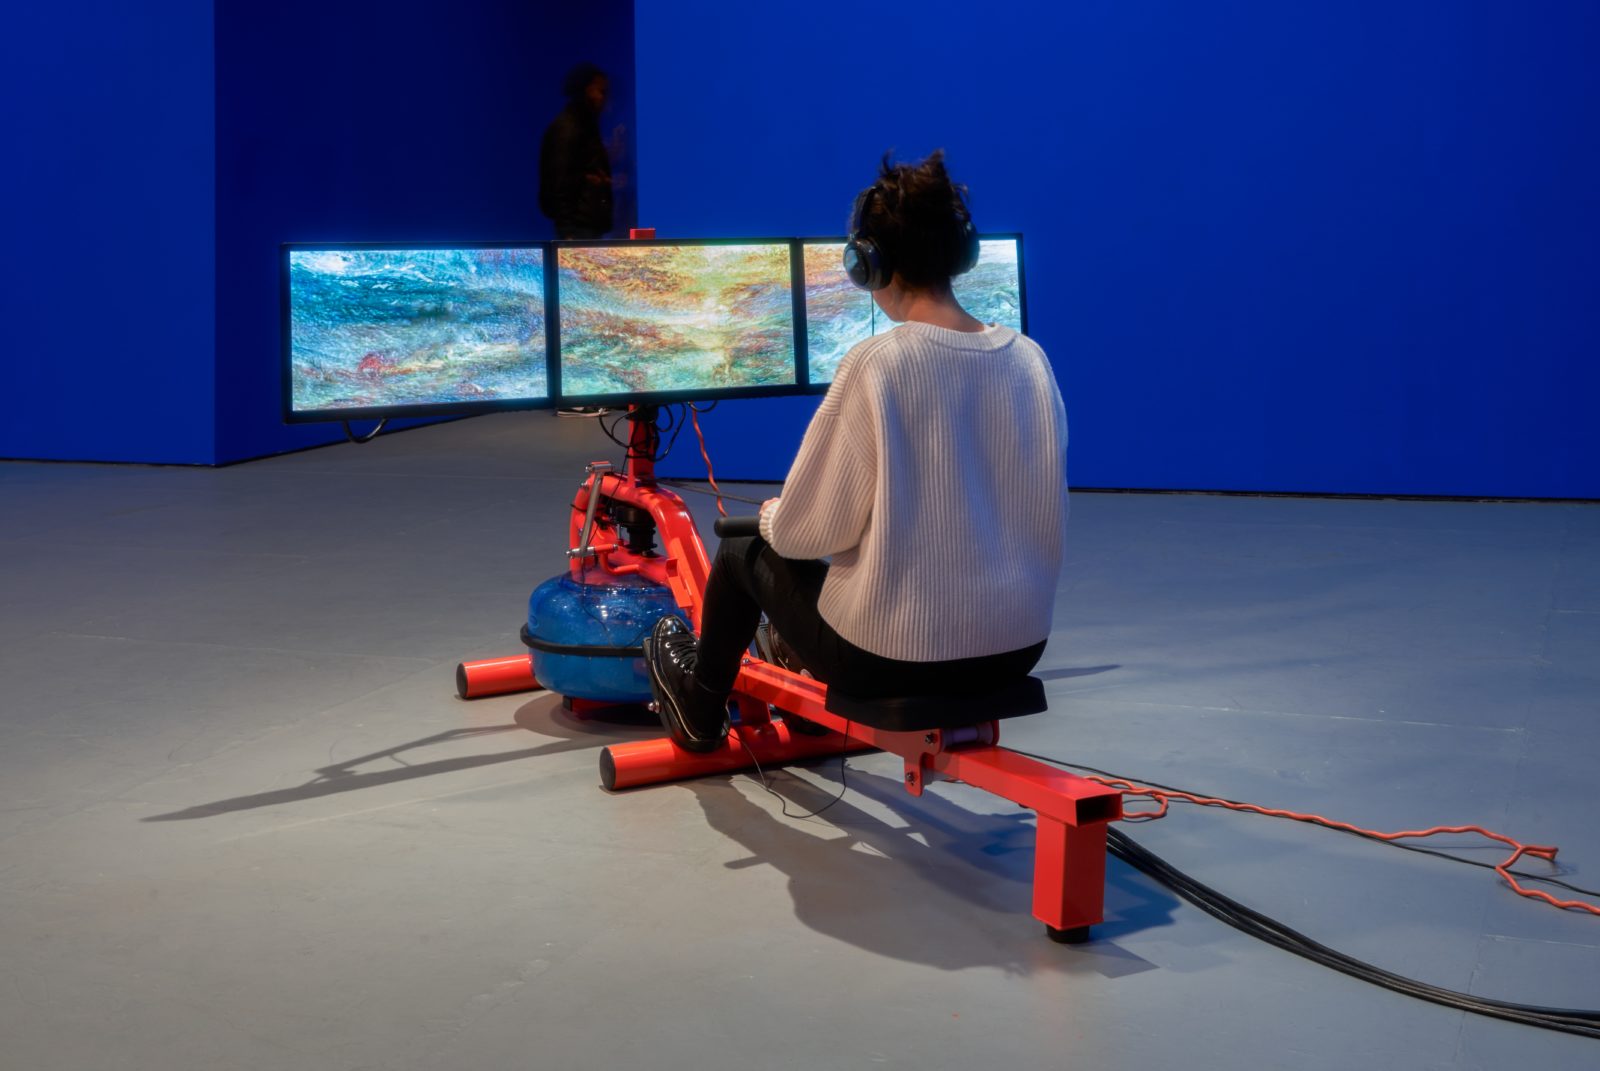 A woman in a white sweater, and wearing headphones, sitting on an orange rowing machine with three monitors depicting waves. The room around her is a vibrant blue.